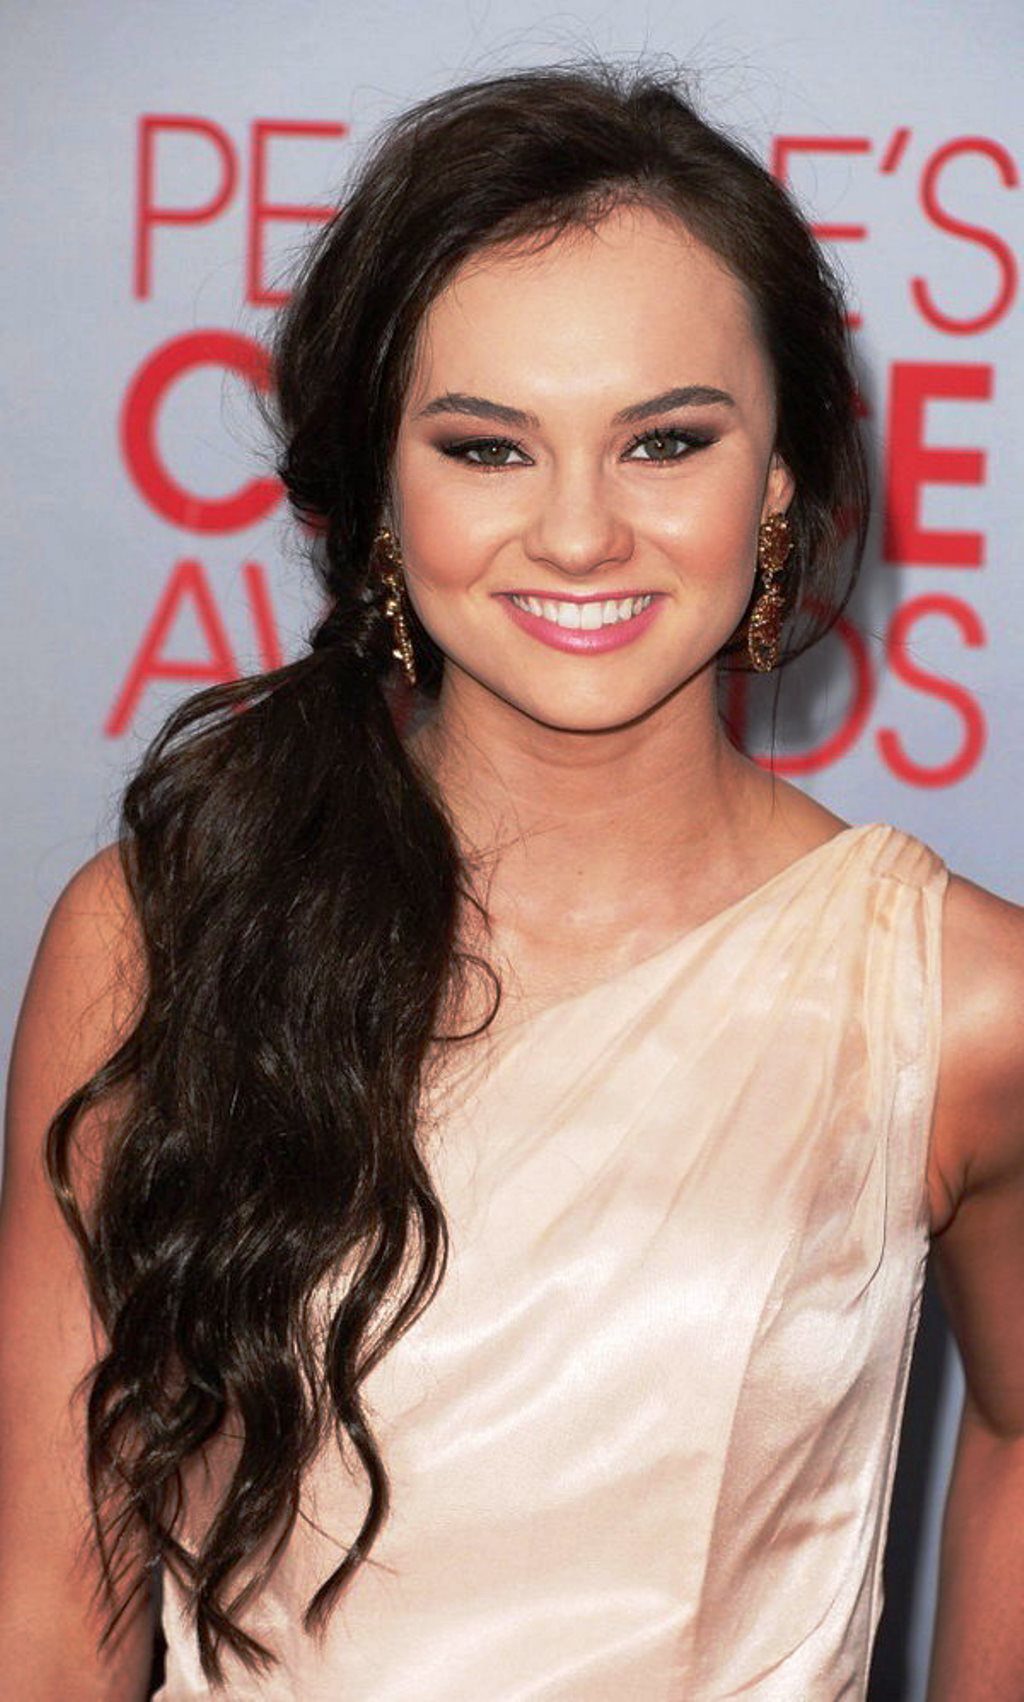 Hairstyles For Long Hair For Prom 2013 For Women